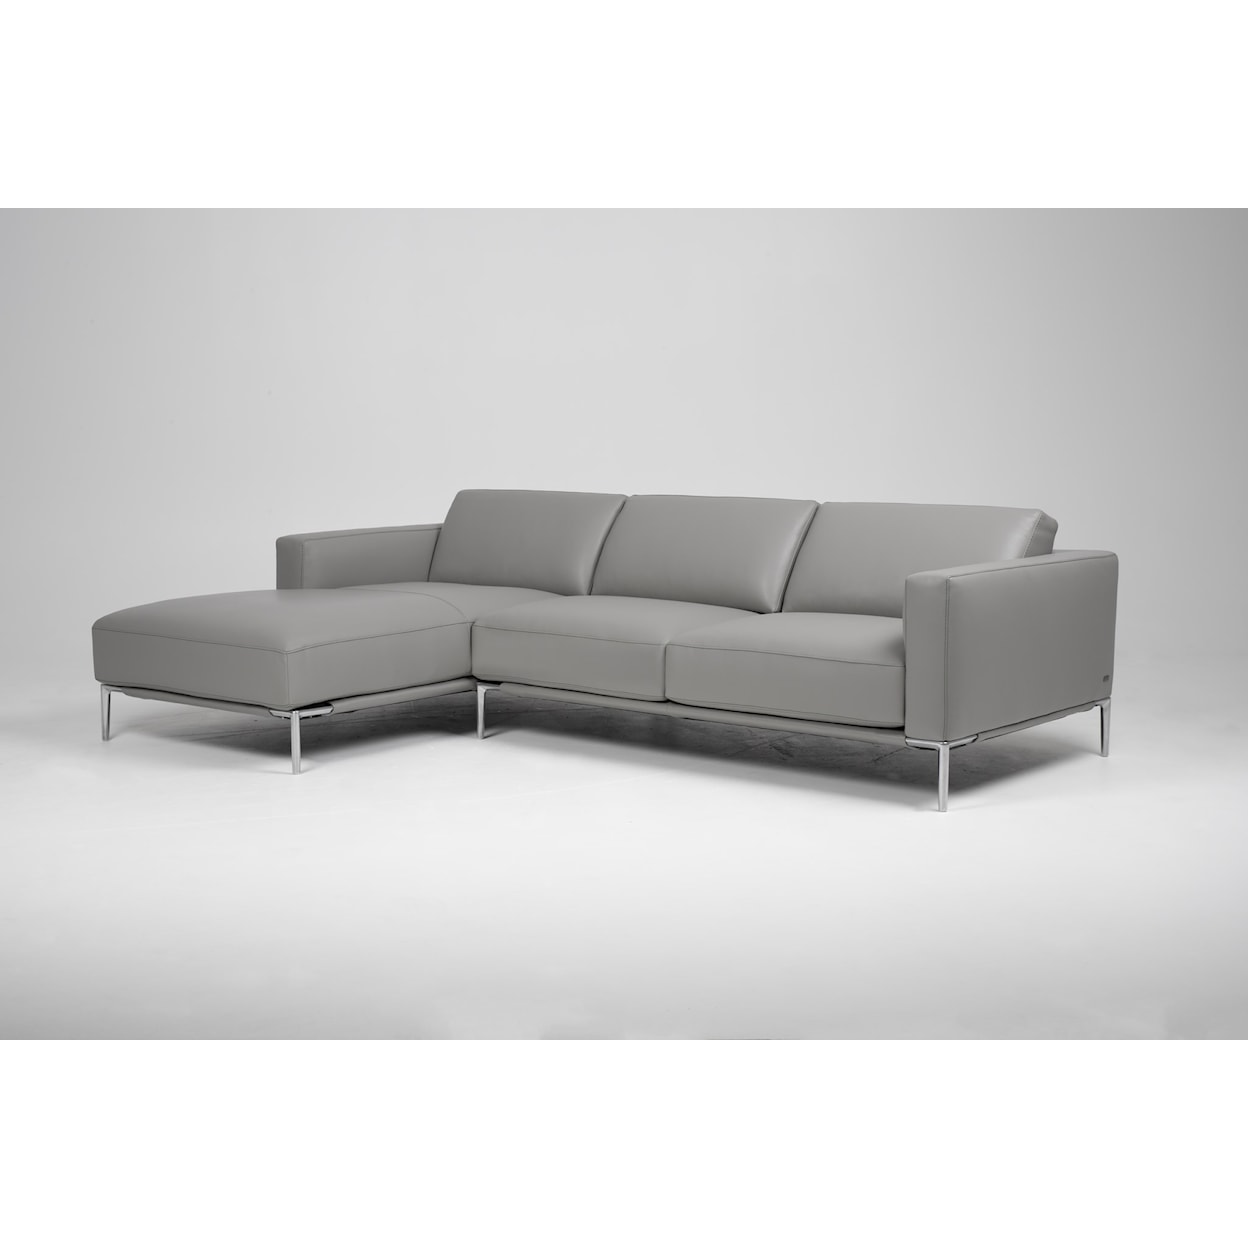 American Leather London Sofa with Chaise